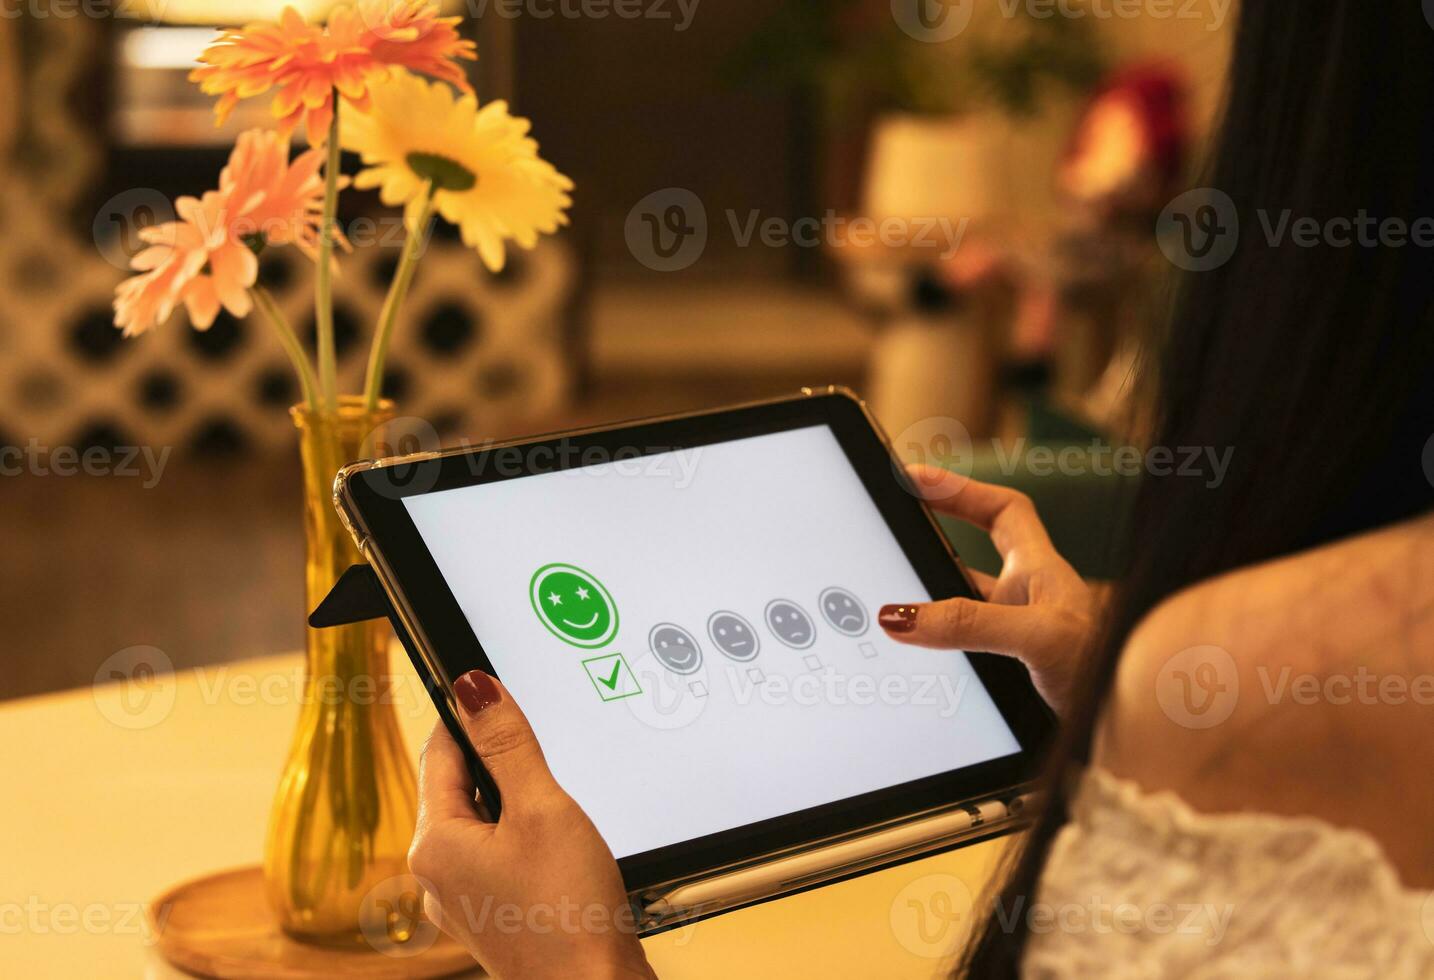 Customers choose emoticons rating to service on online application. concept of customer satisfaction surveys, reviews of store products to evaluate the quality leading to business reputation ranking. photo